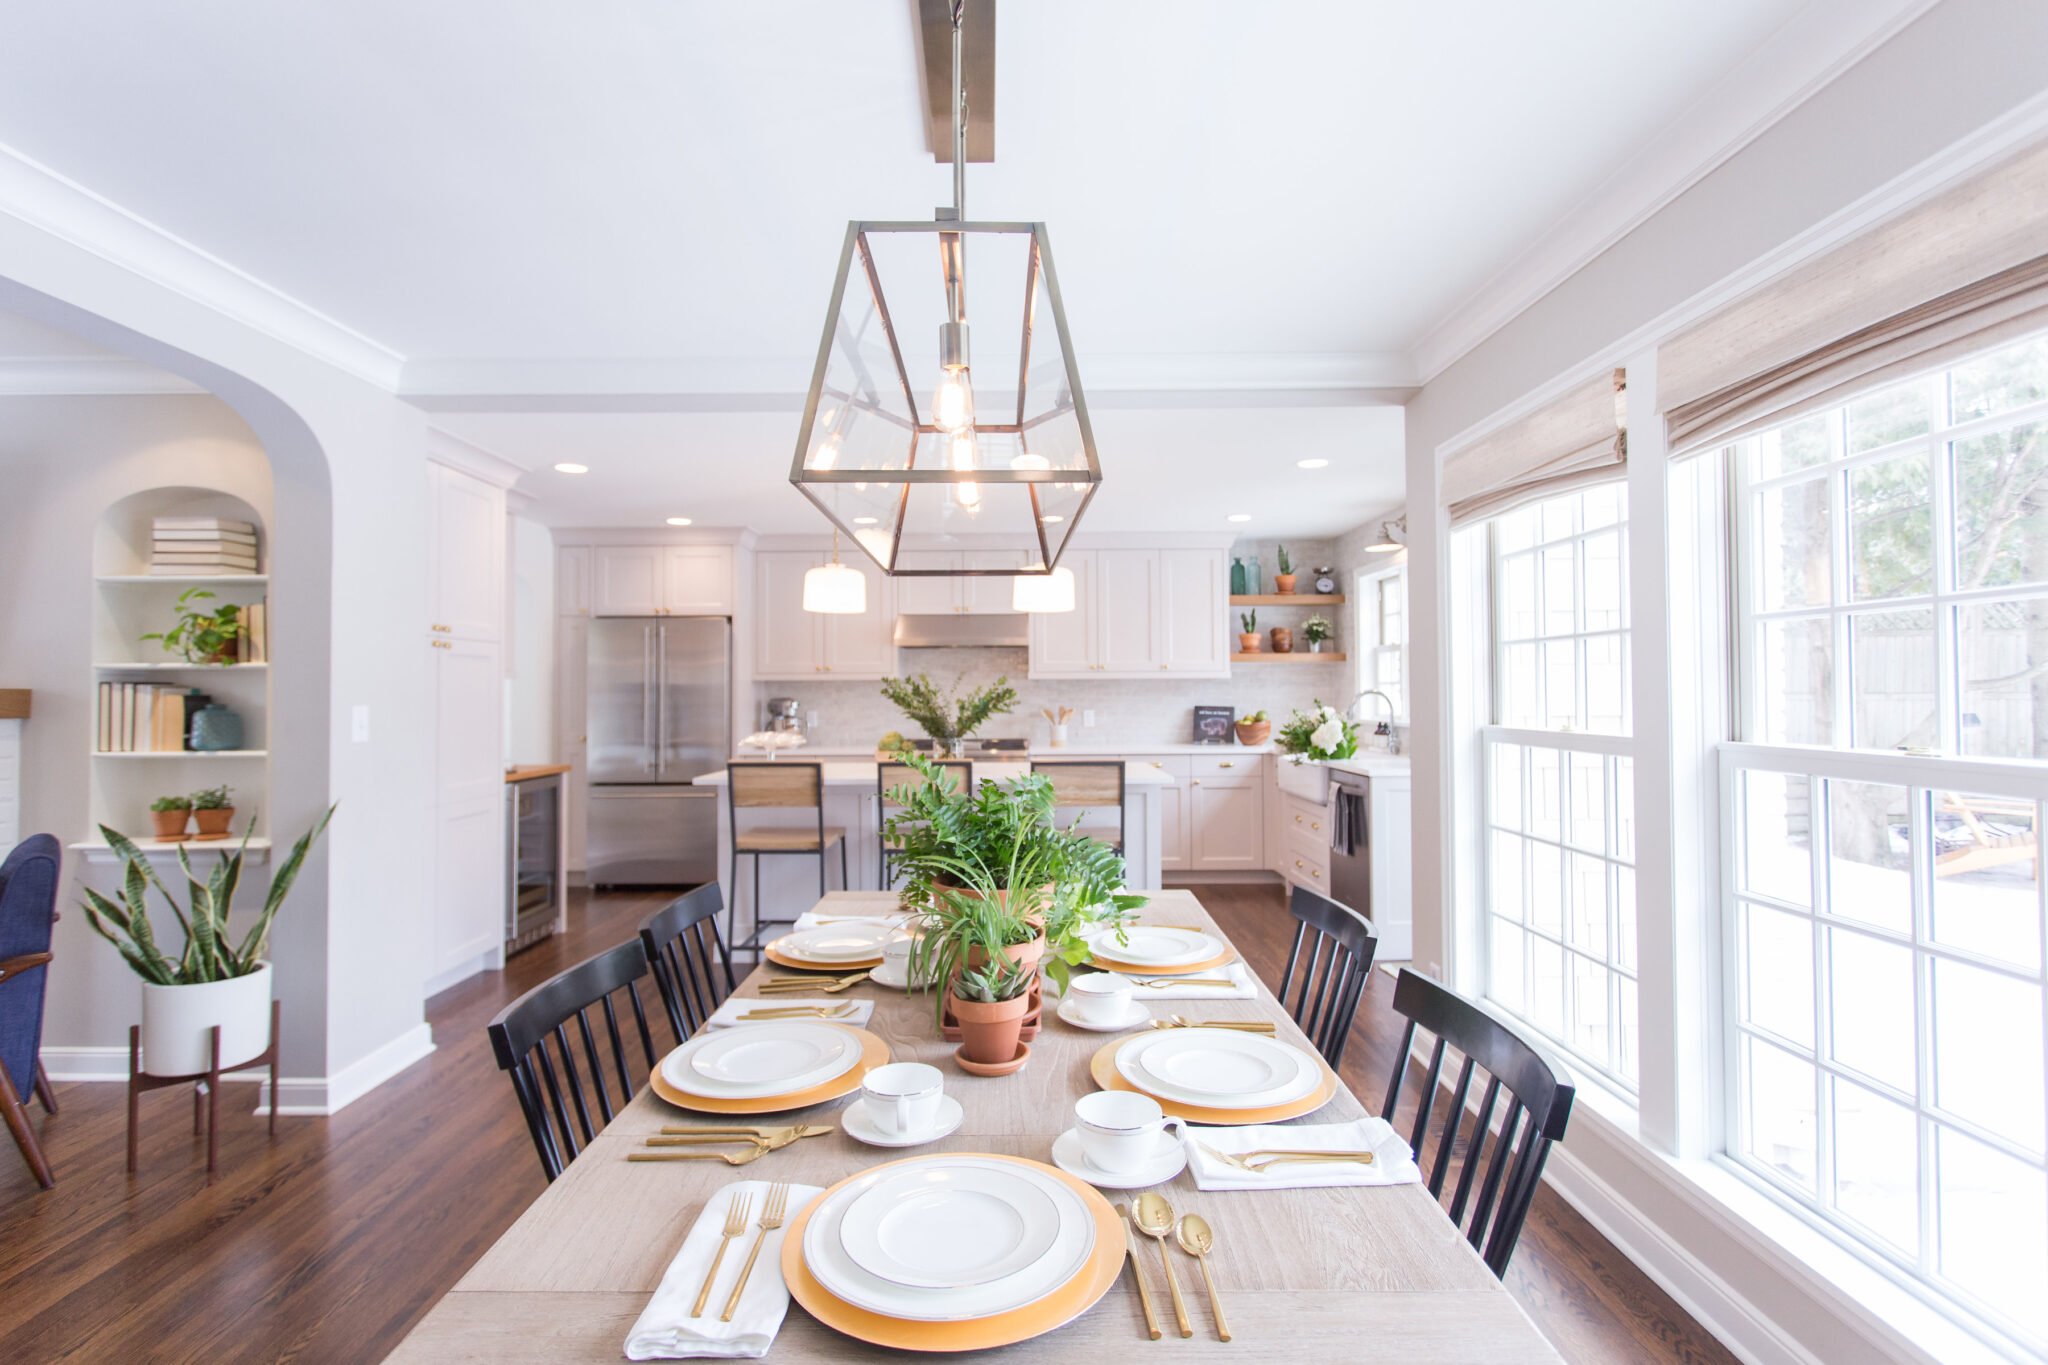 Dining room table with houseplants as centerpiece